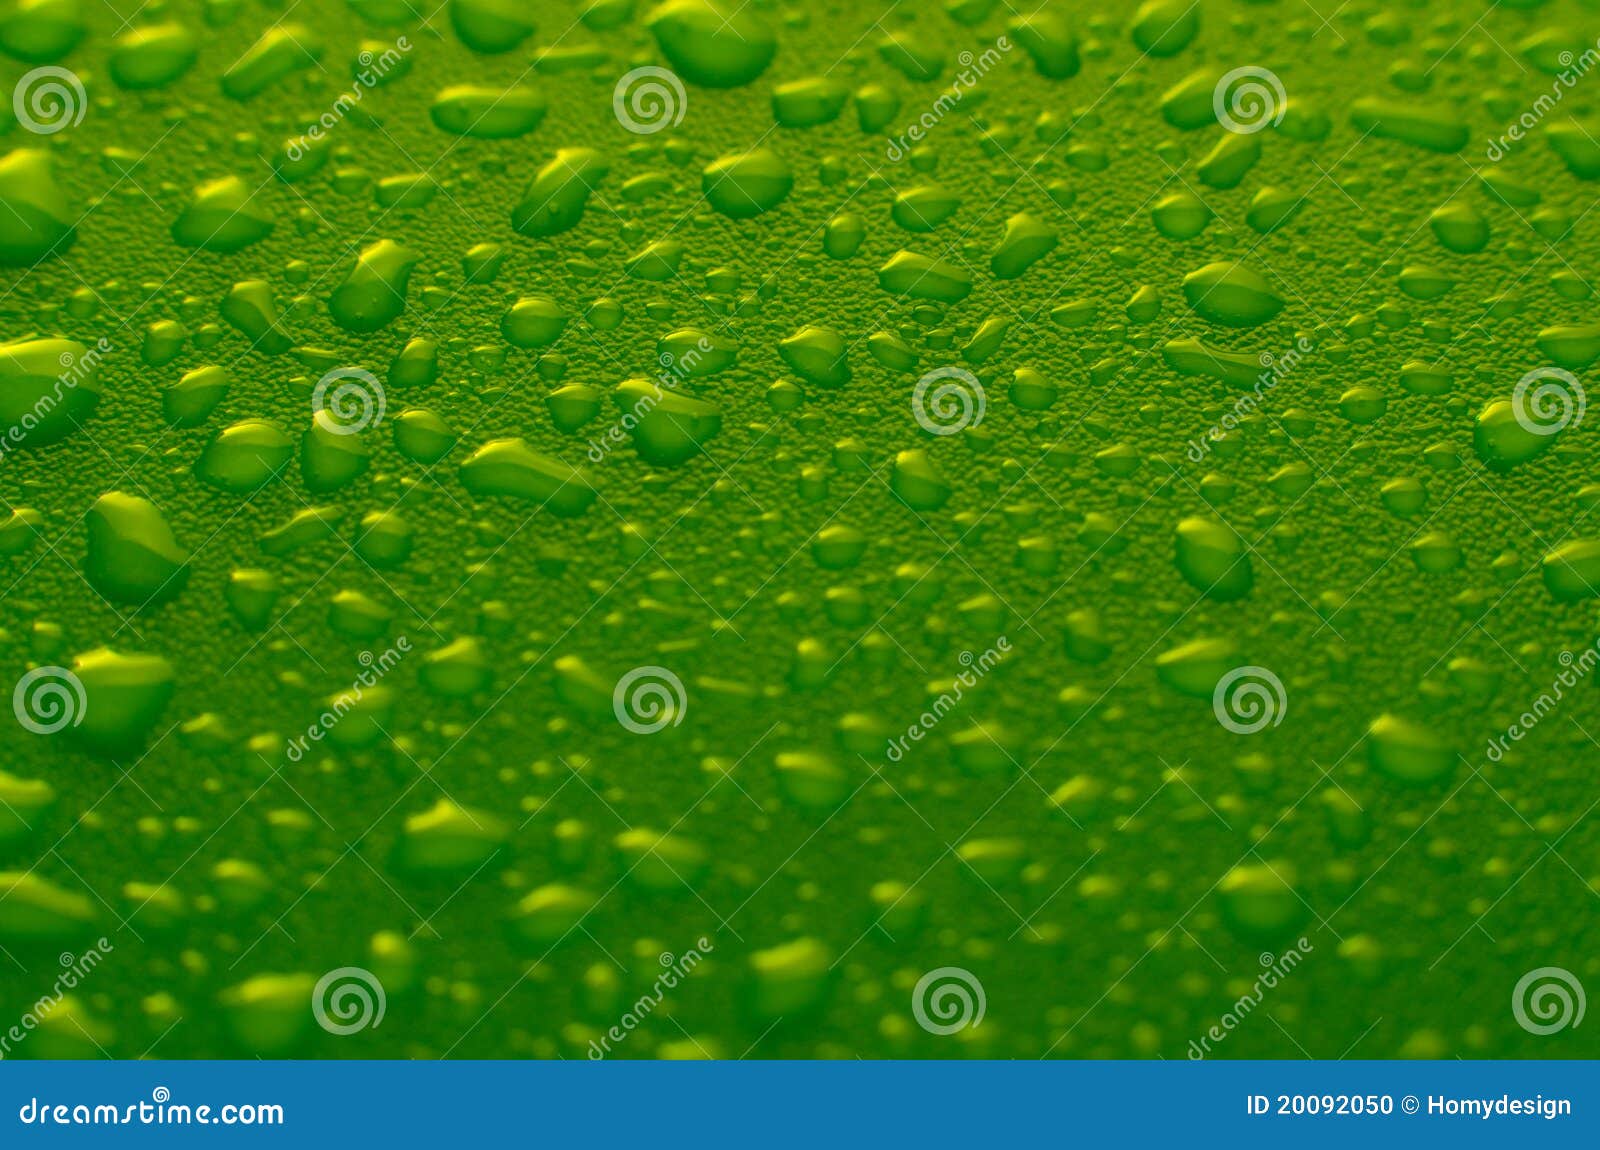 Green water drops stock photo. Image of background, splash - 20092050